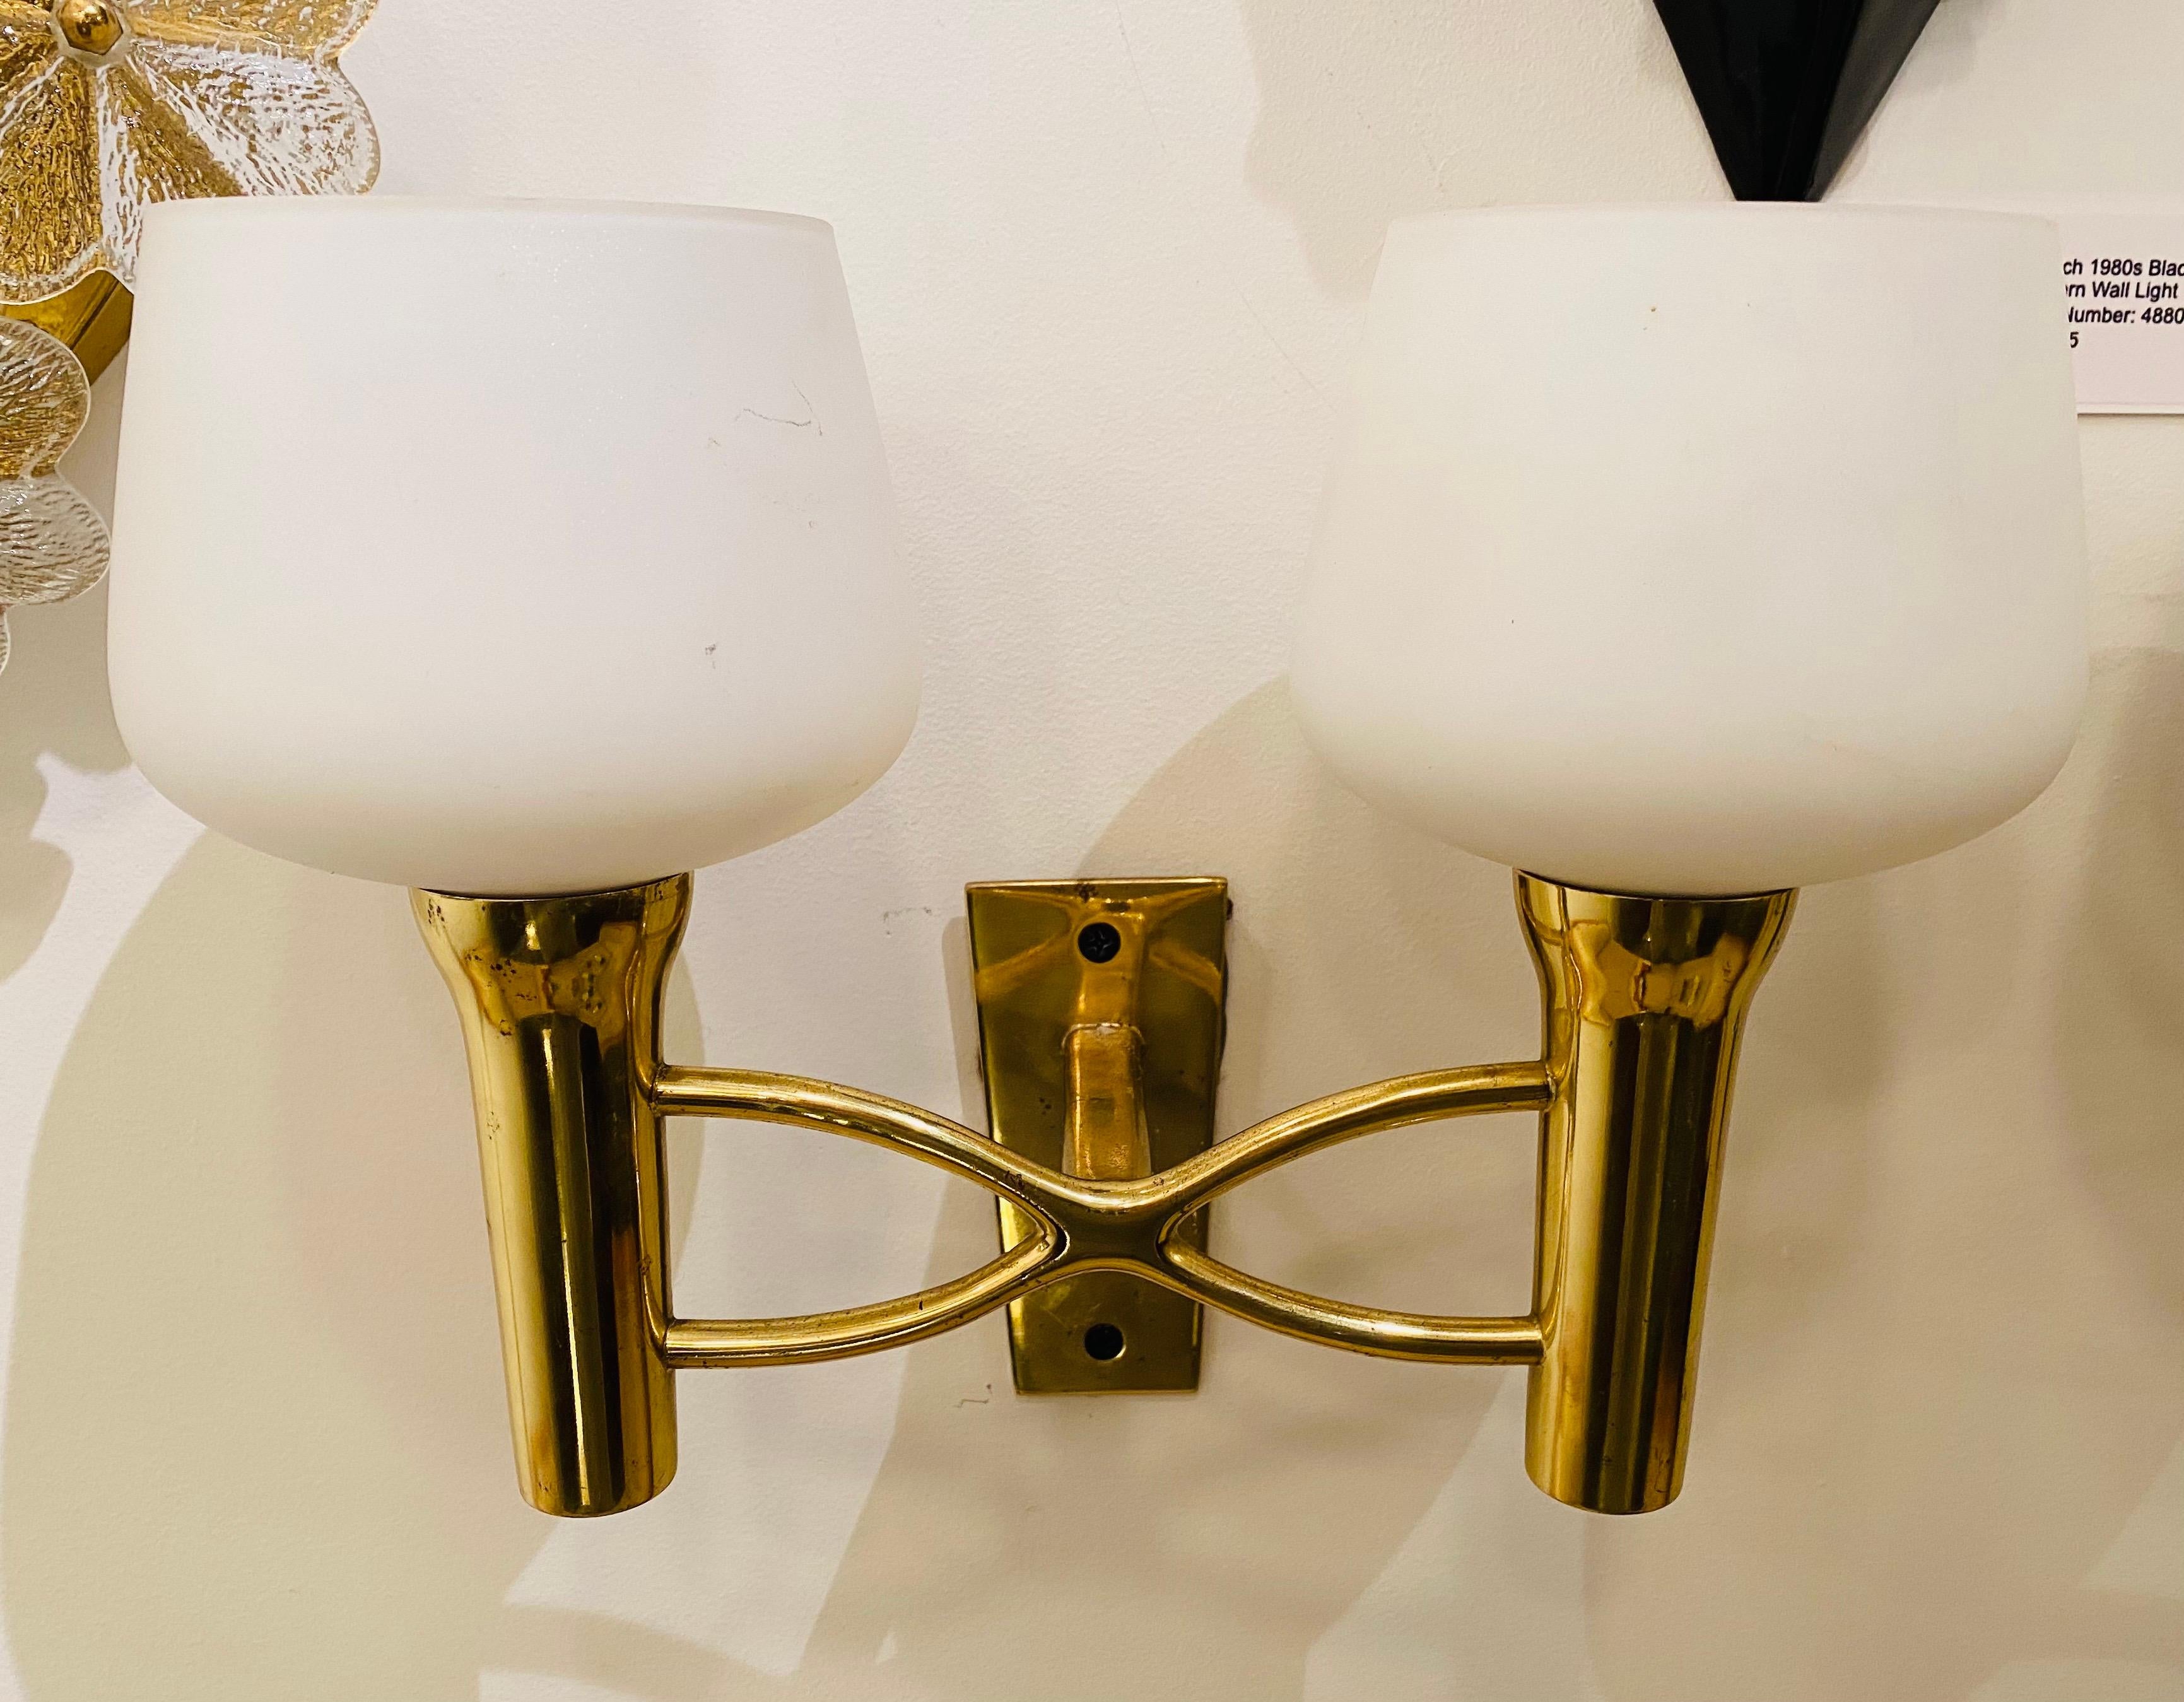 An original pair of 1950s Italian sconces with decorative aged polished brass “X” fixtures with double sockets holding white glass shades. Newly rewired.